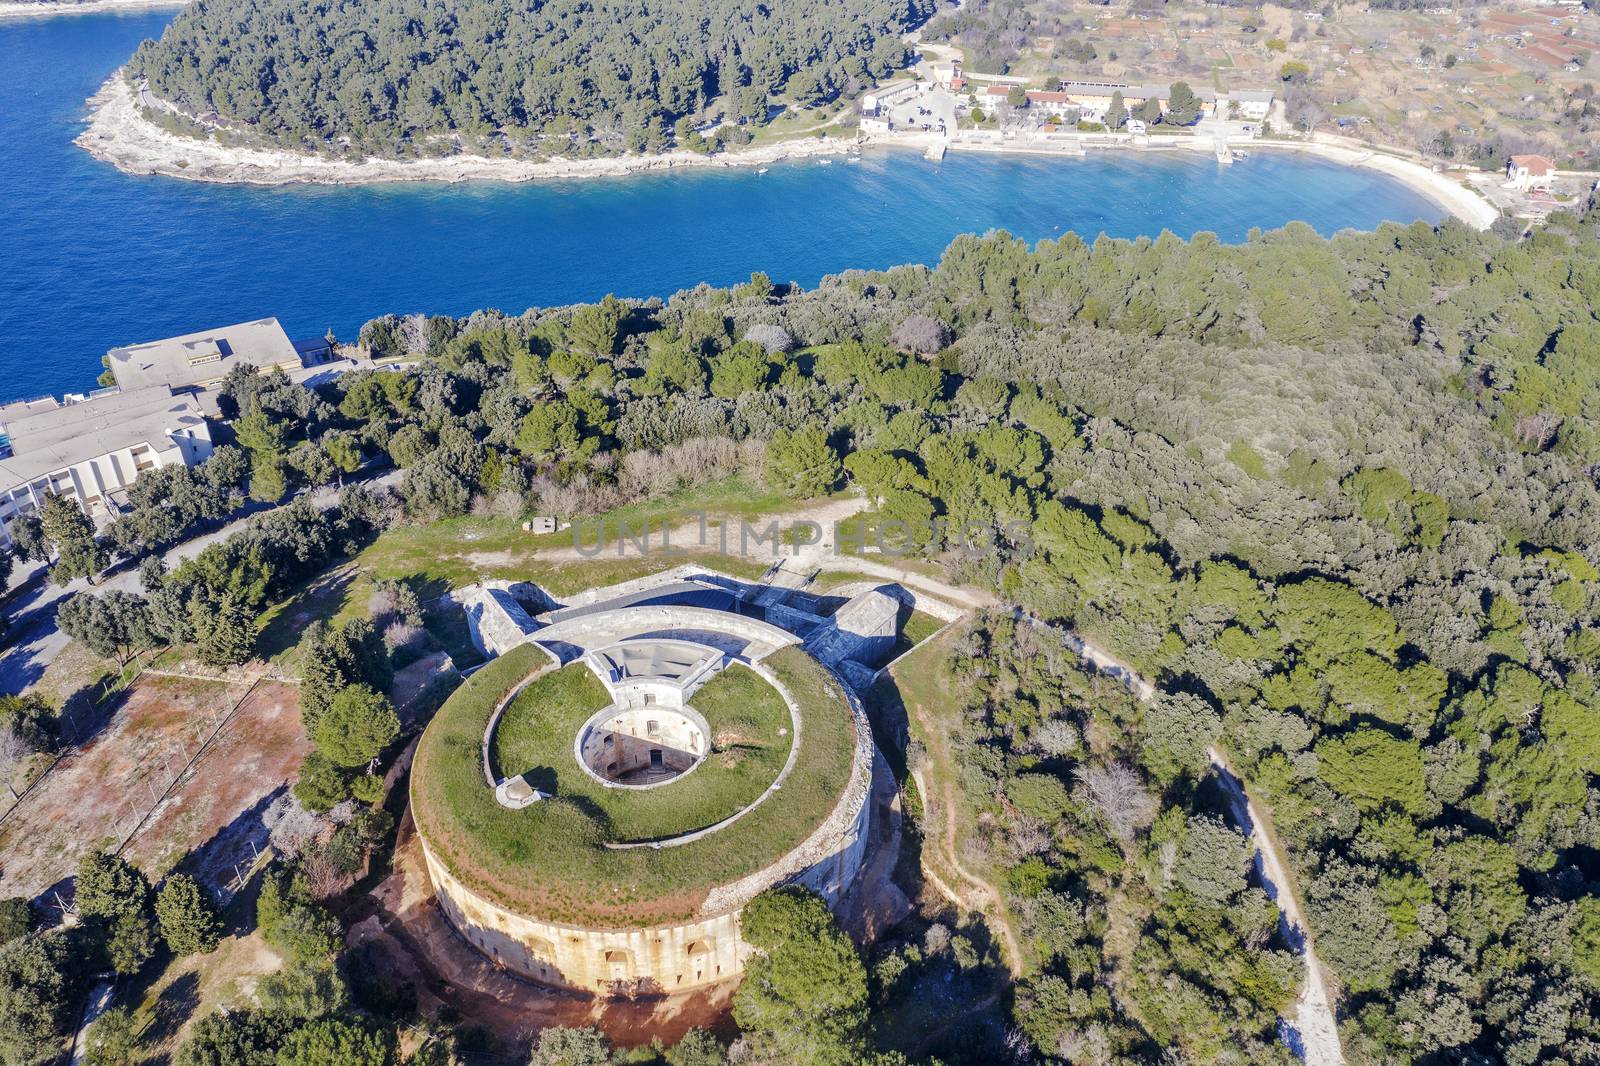 An aerial view of old Fort Bourguignon, Pula, Istria, Croatia by sewer12